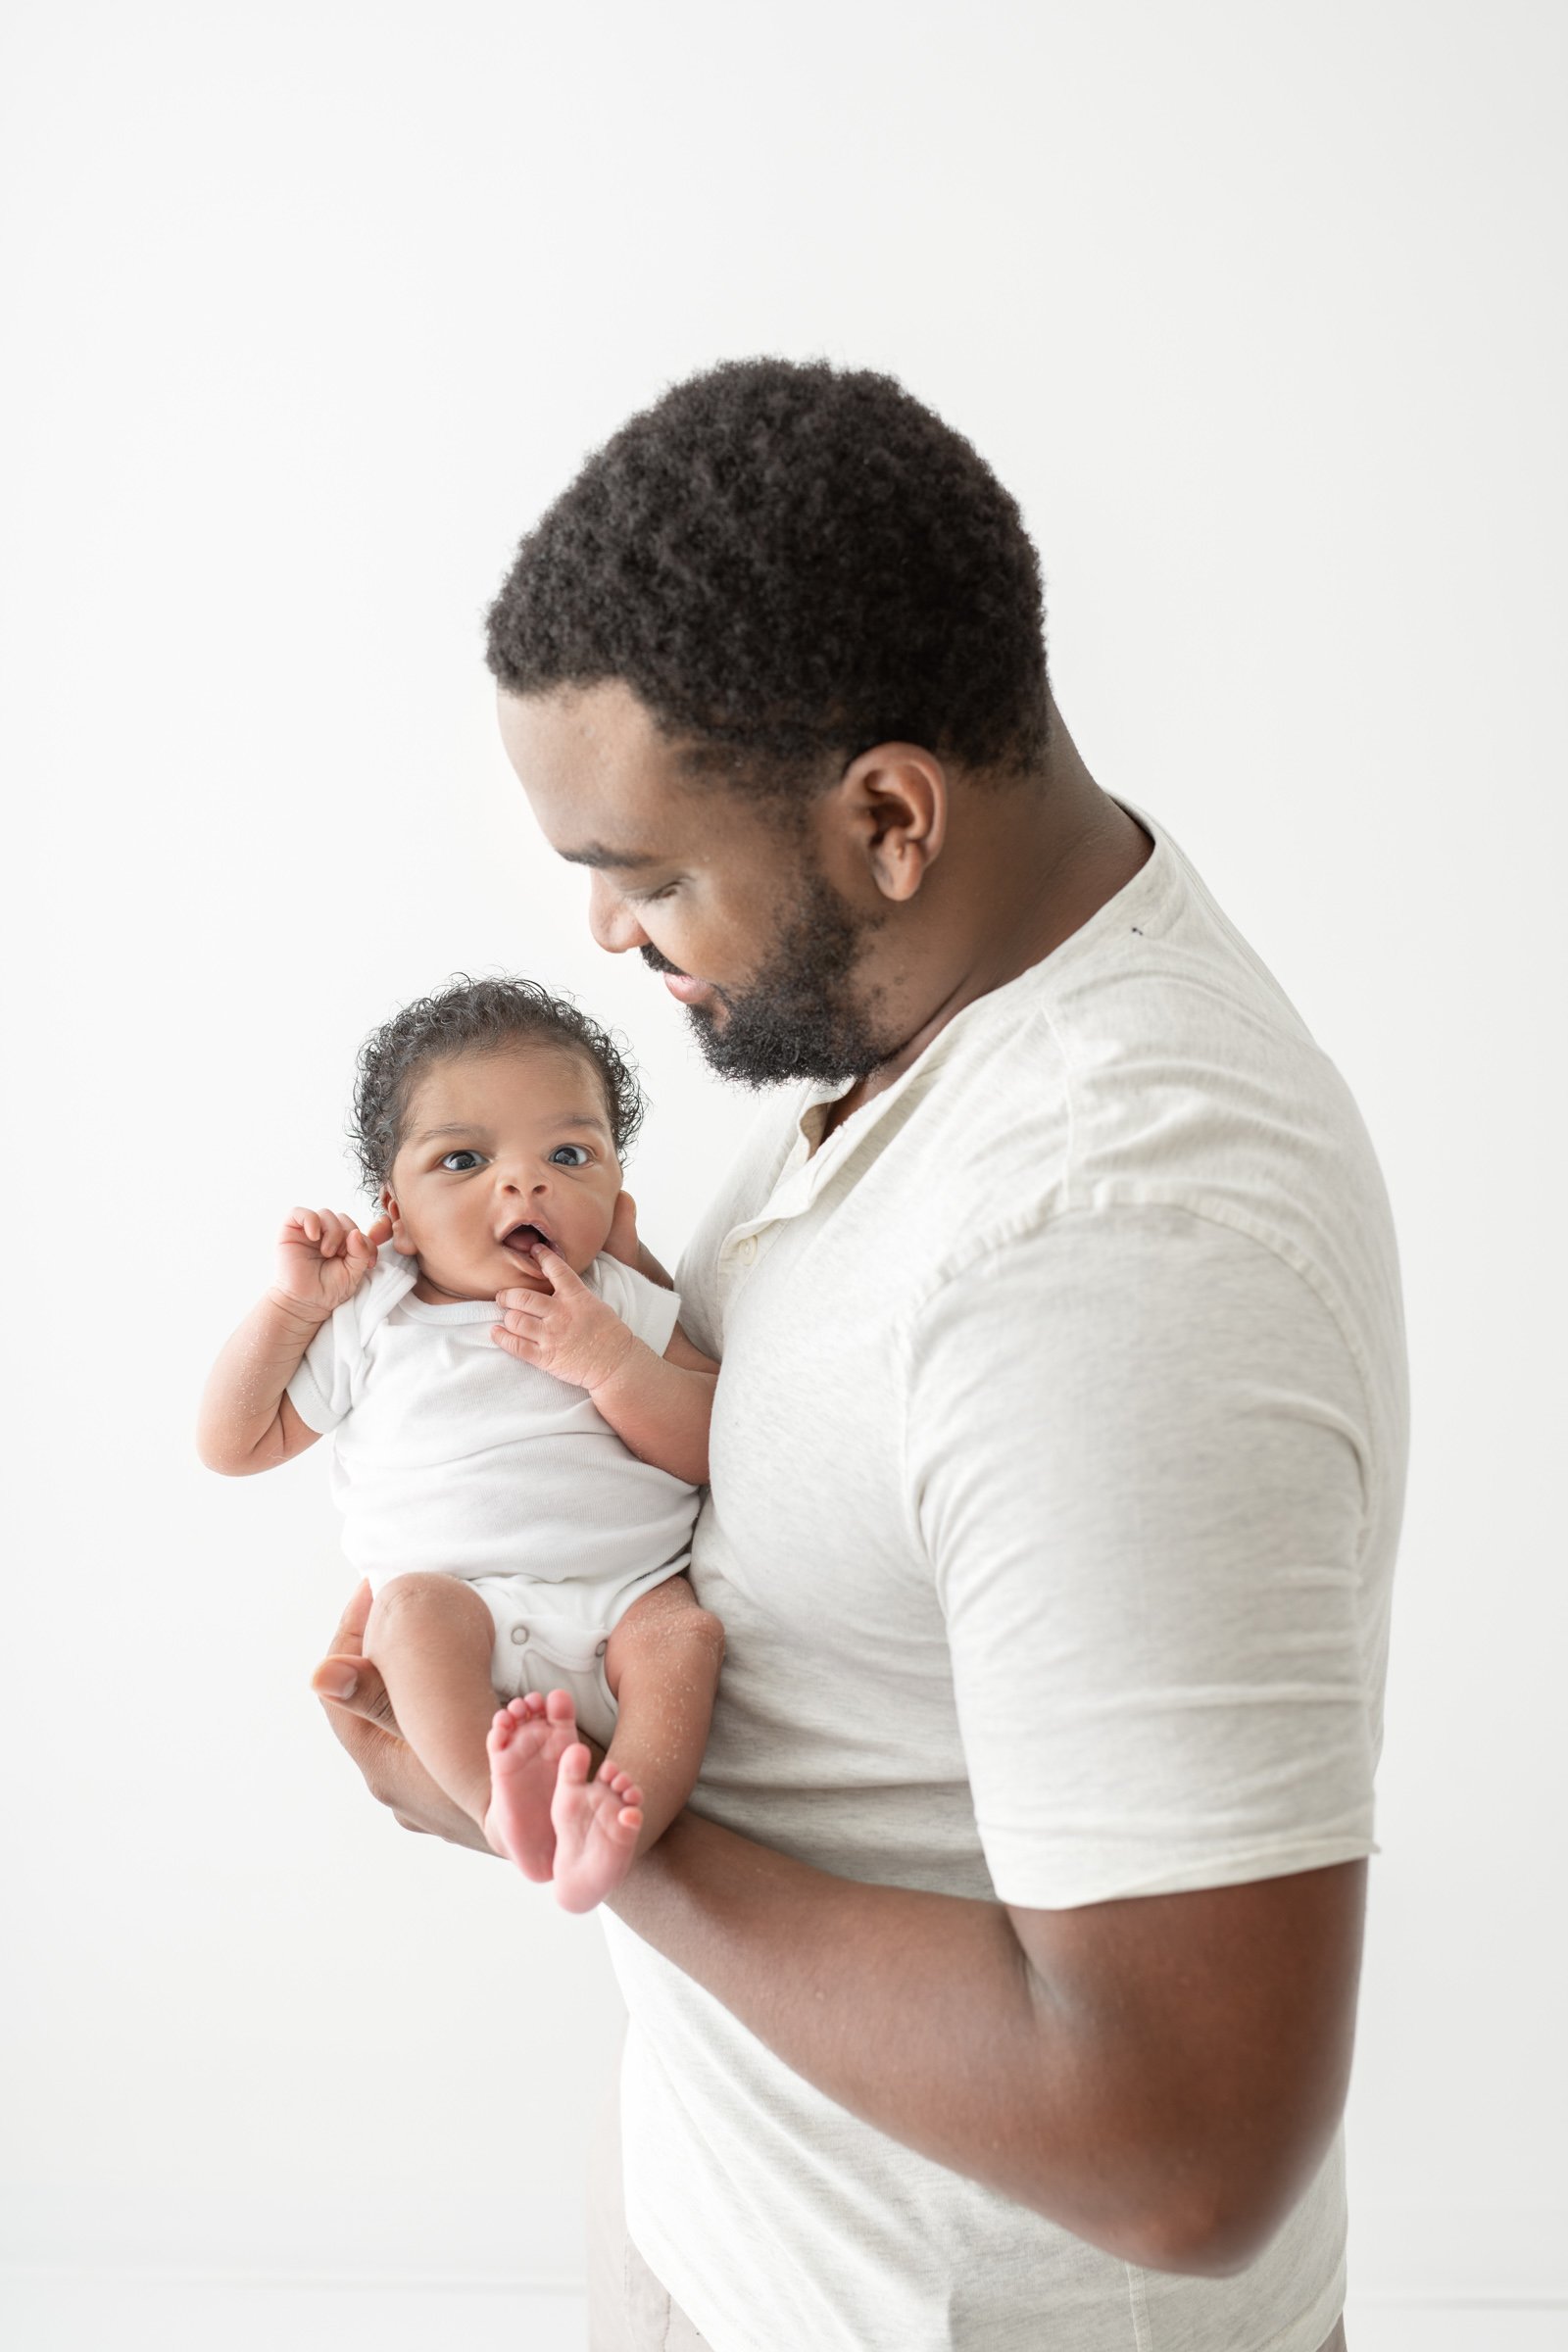  Newborn portraits of a baby with his father in a New Jersey studio by Nicole Hawkins Photography. bright newborn studio photo father baby #nicolehawkinsphotography #NJbabyphotography #newbornportraits #NewJerseyStudioPhotography #newbornsession 